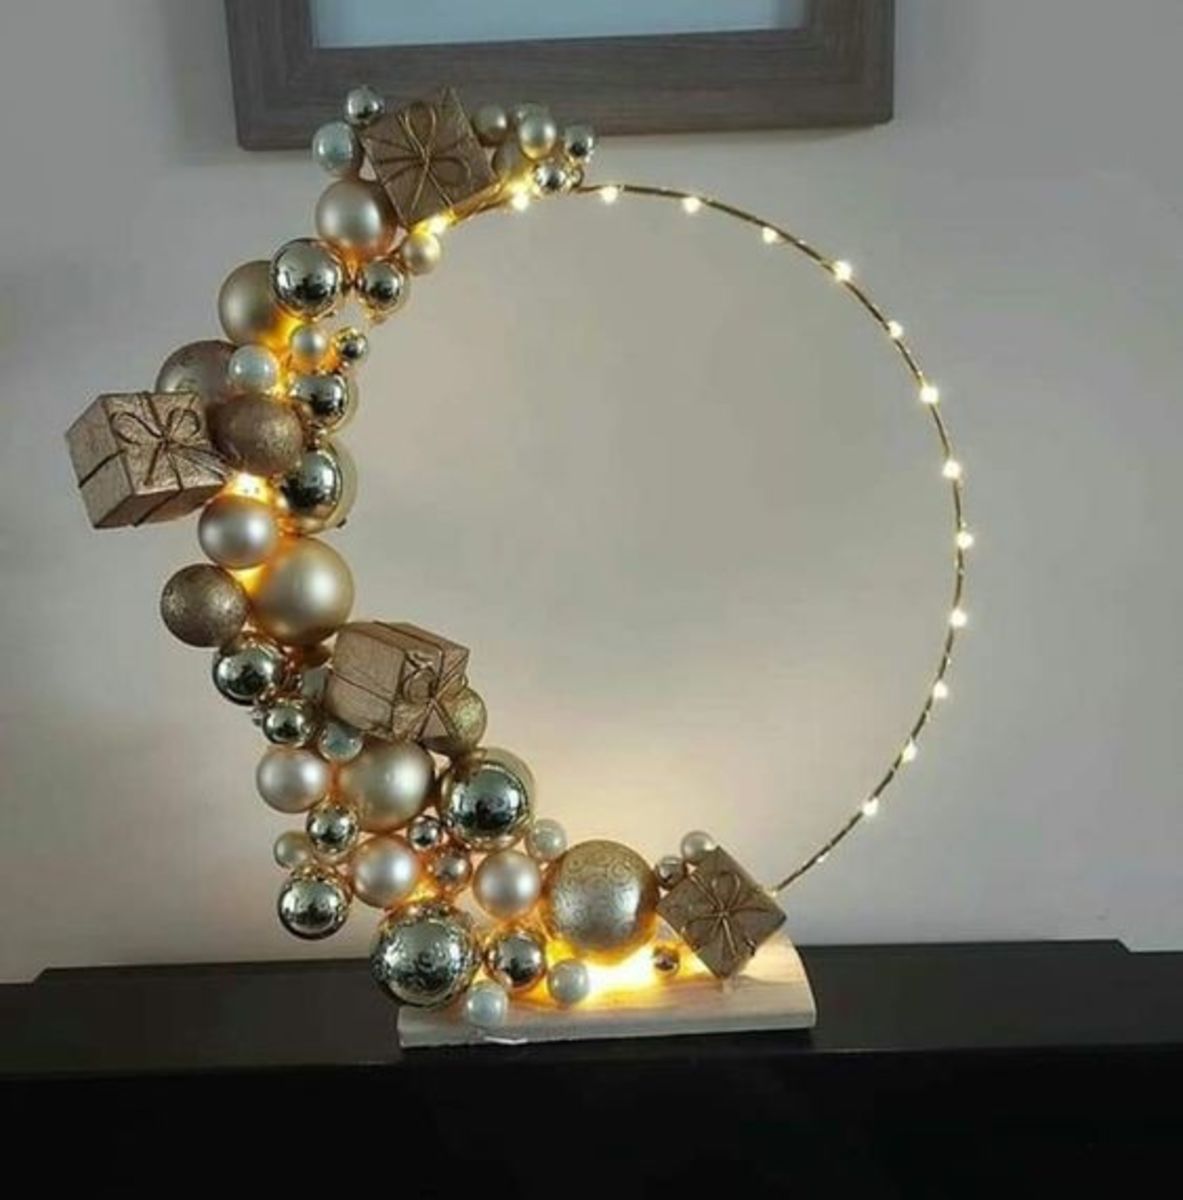 Hula Hoop With Gold Baubles and Gift Boxes